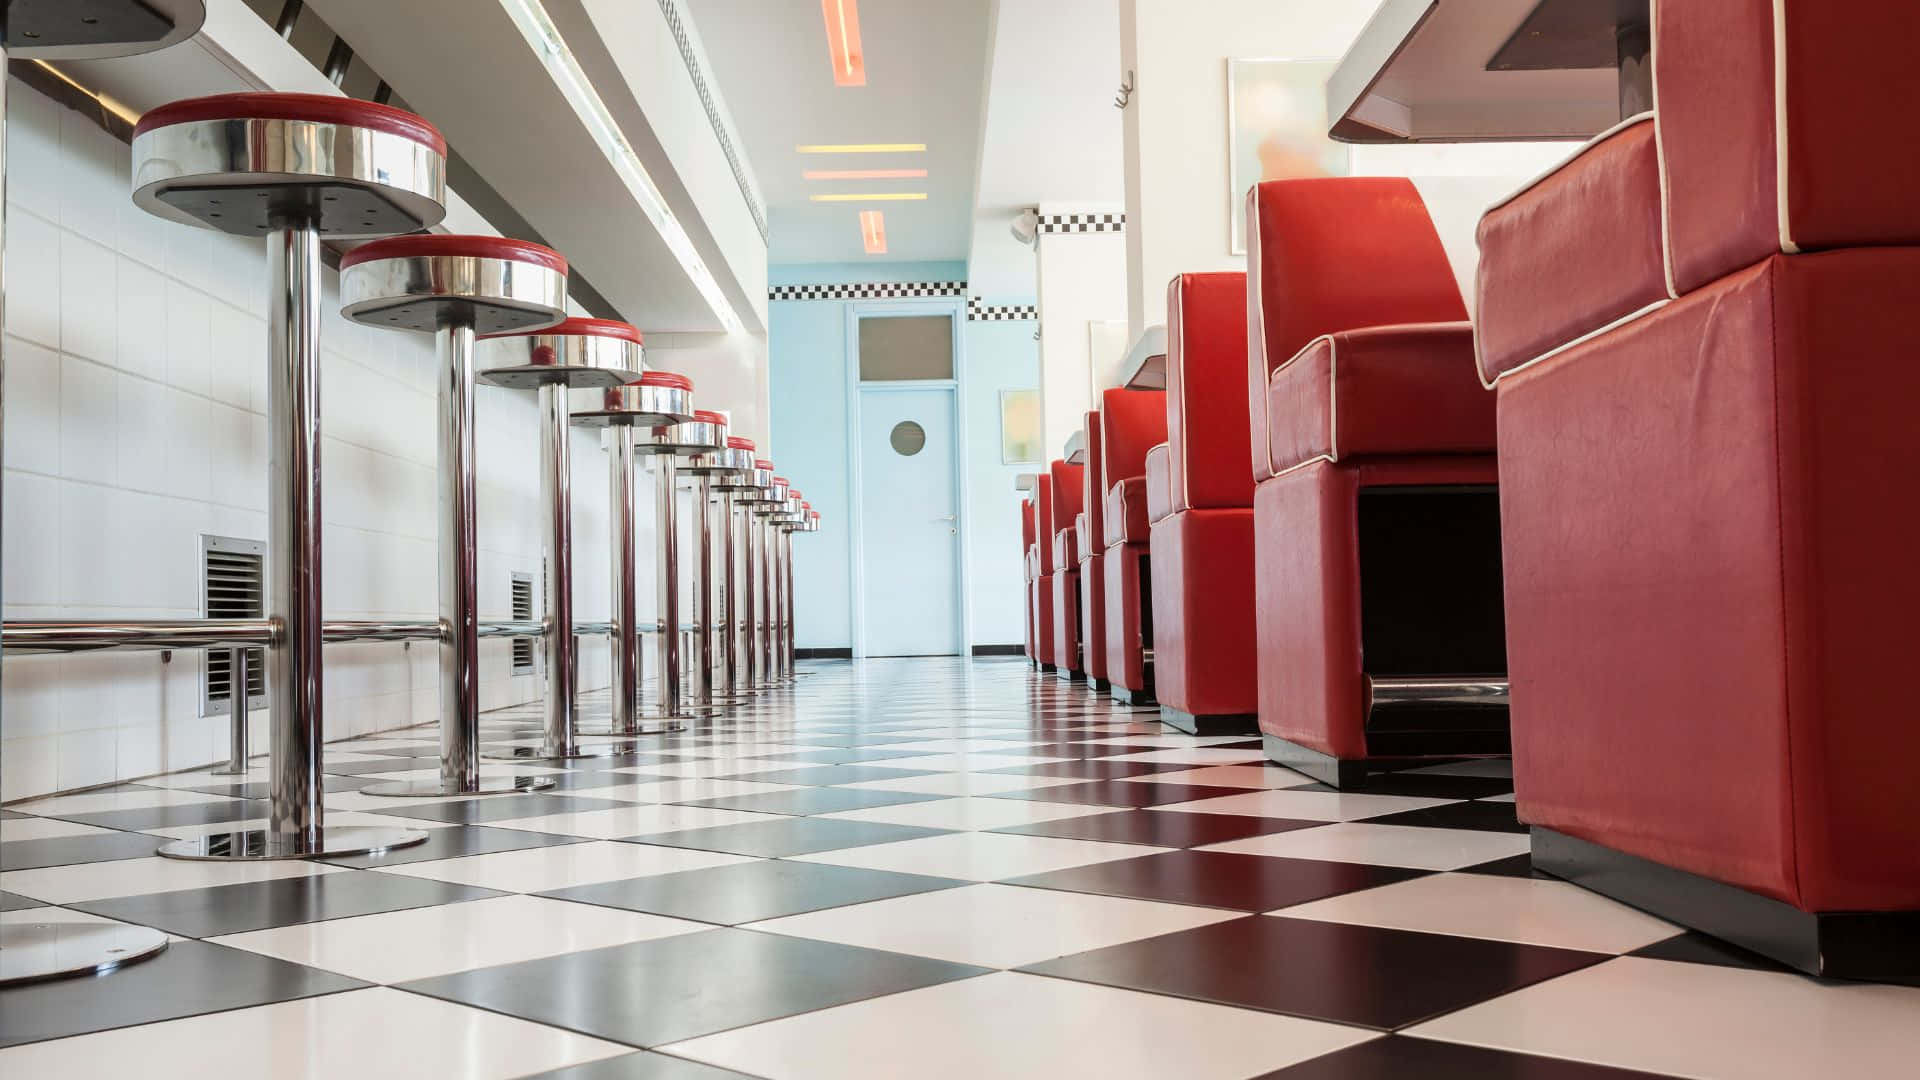 Vintage Diner Interior with Retro Furnishings